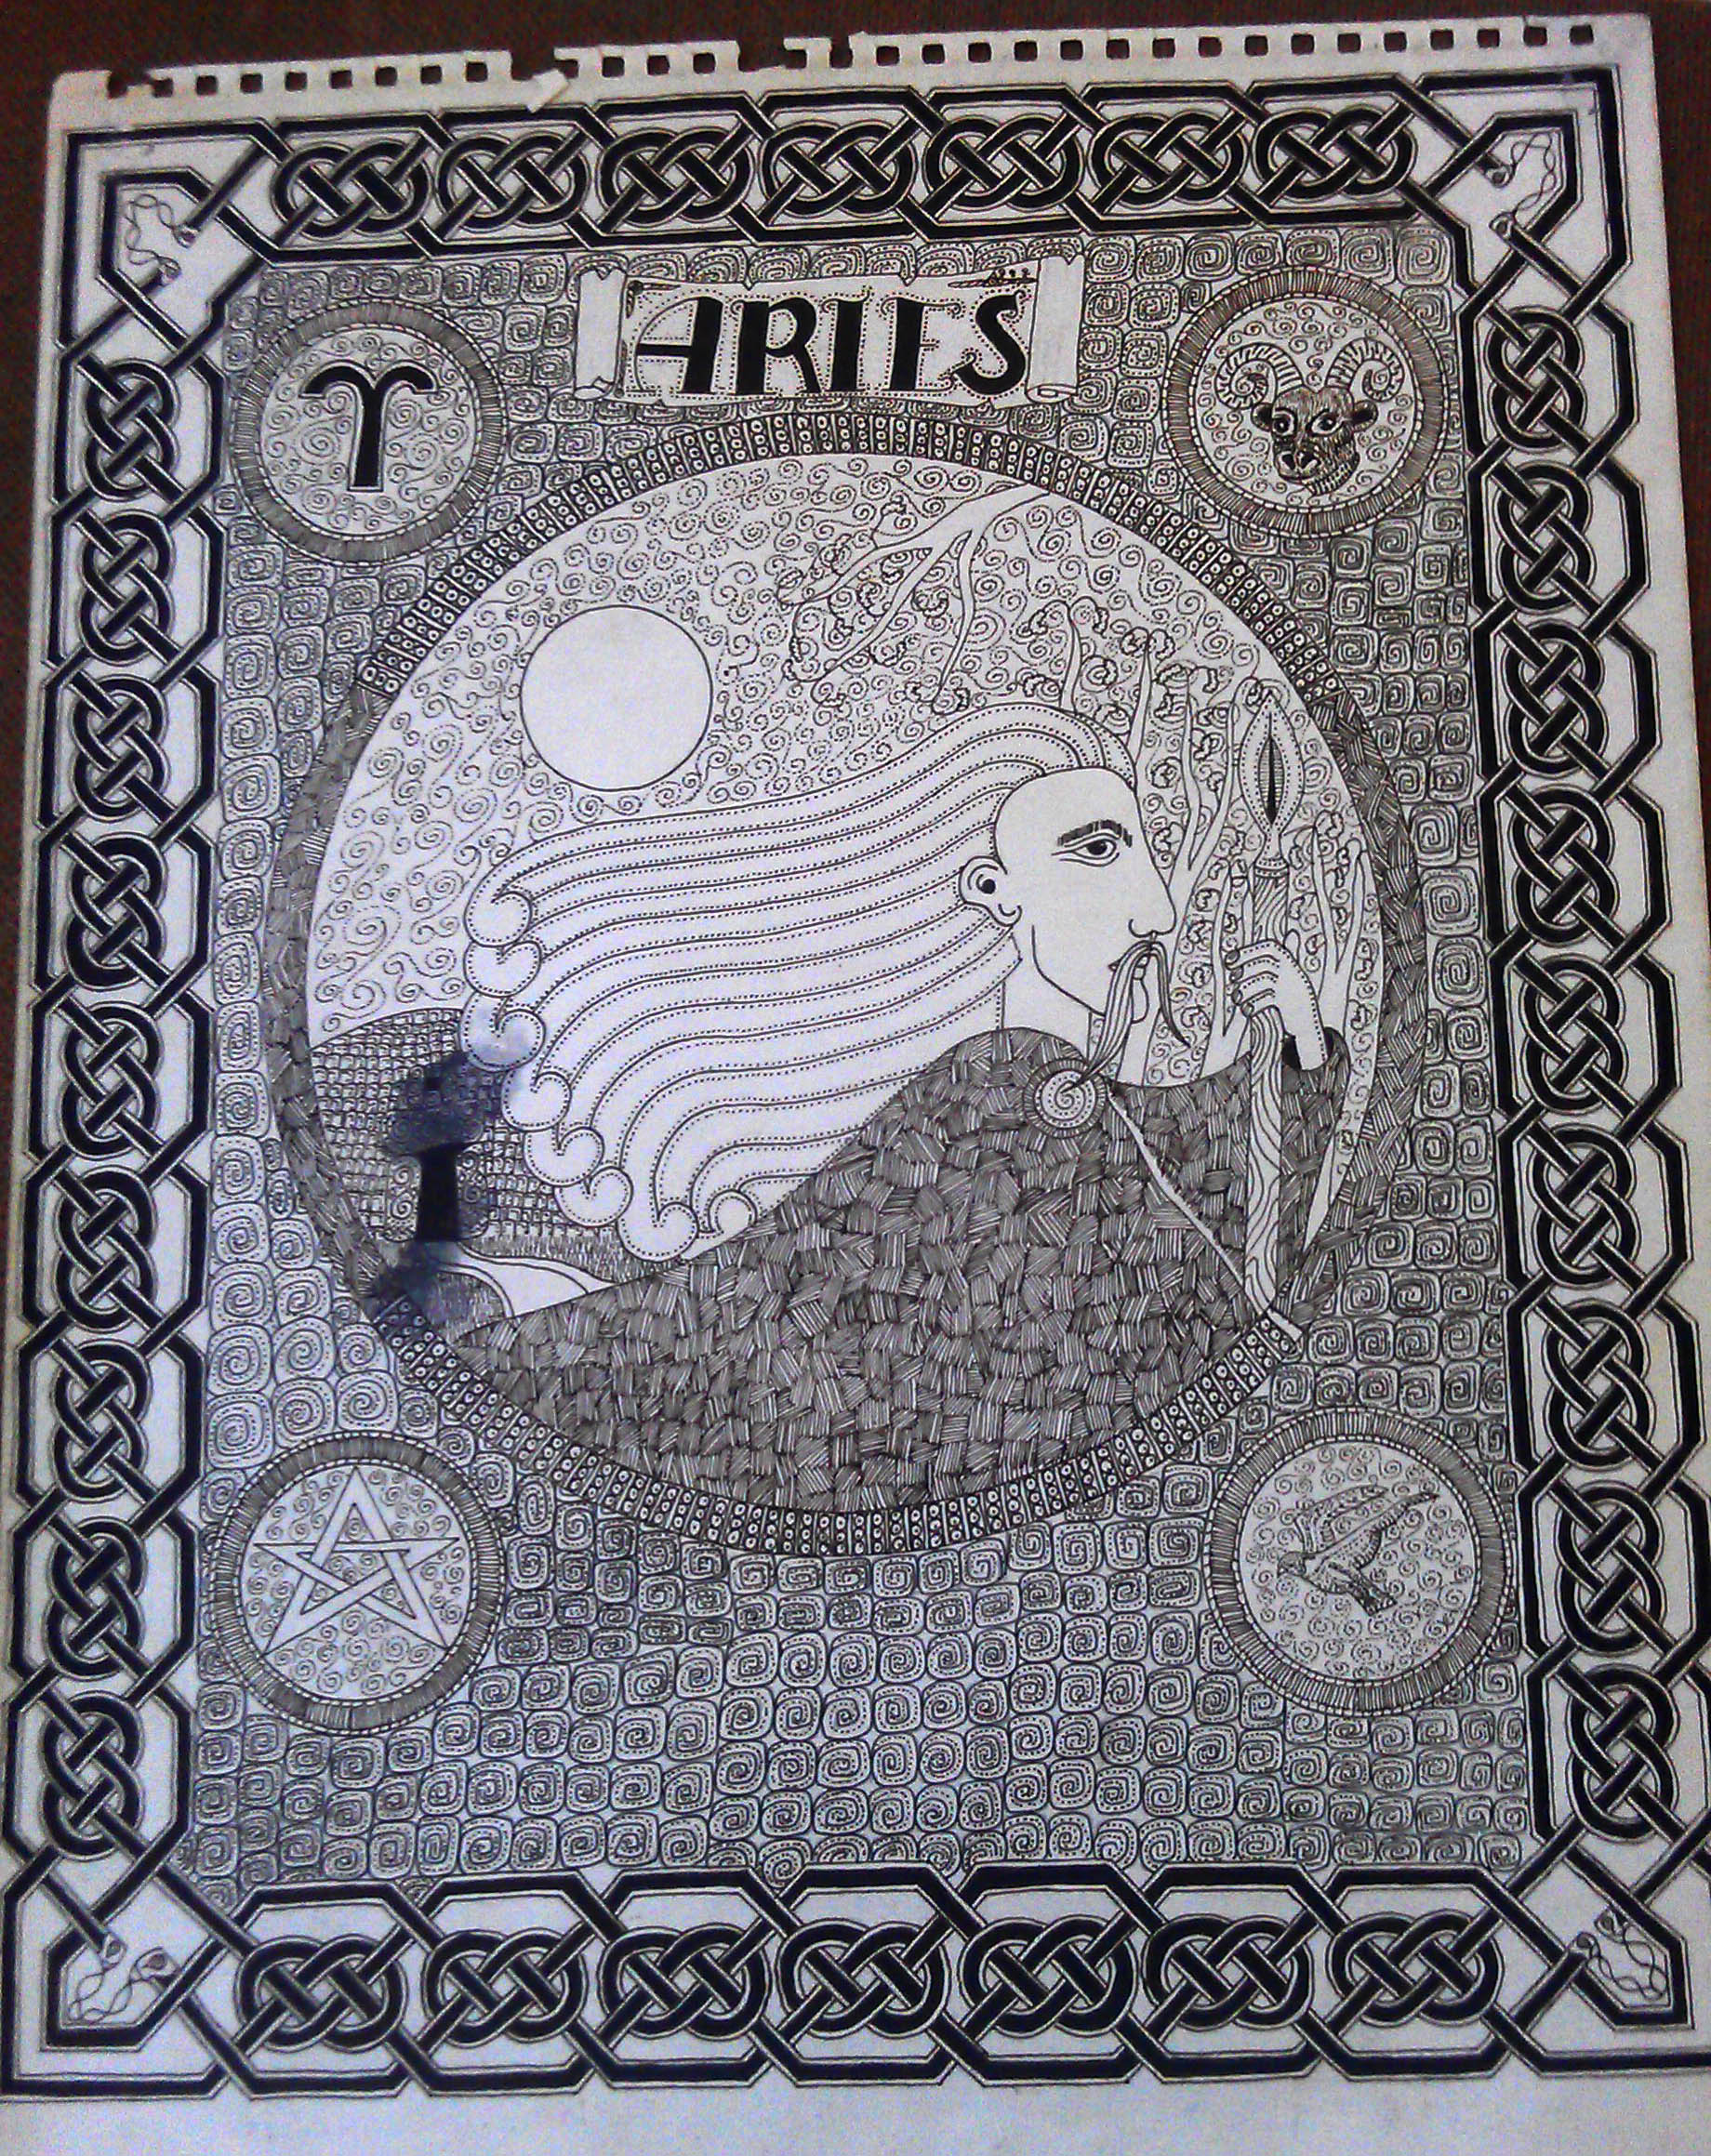 Black and white - part 1 of Celtic Tarot - Aries